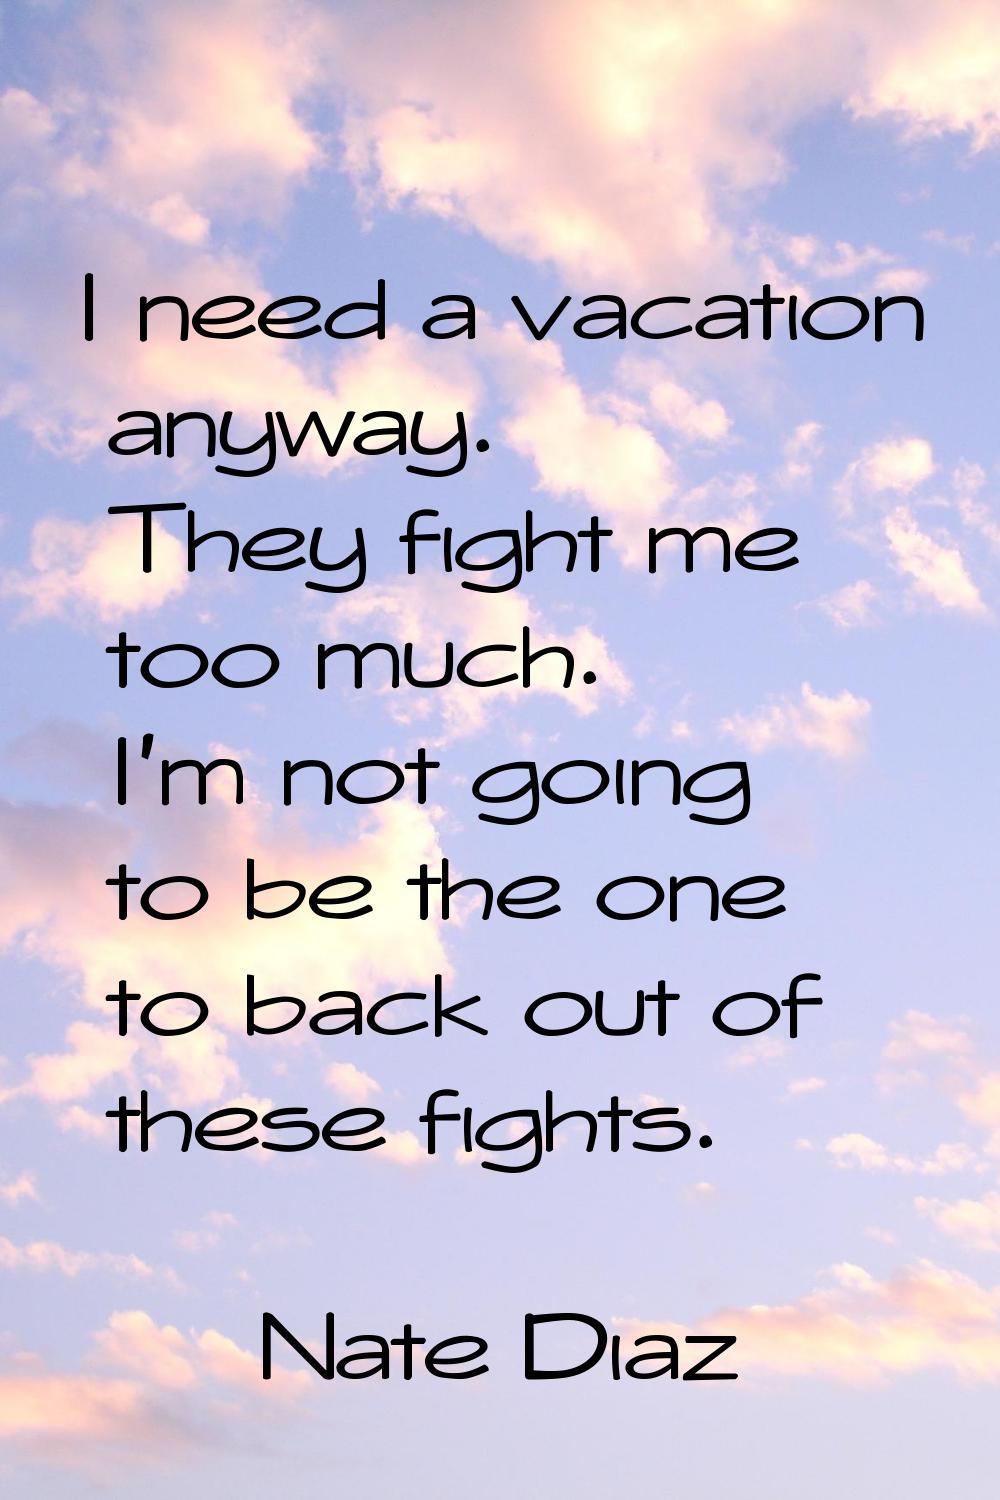 I need a vacation anyway. They fight me too much. I'm not going to be the one to back out of these 